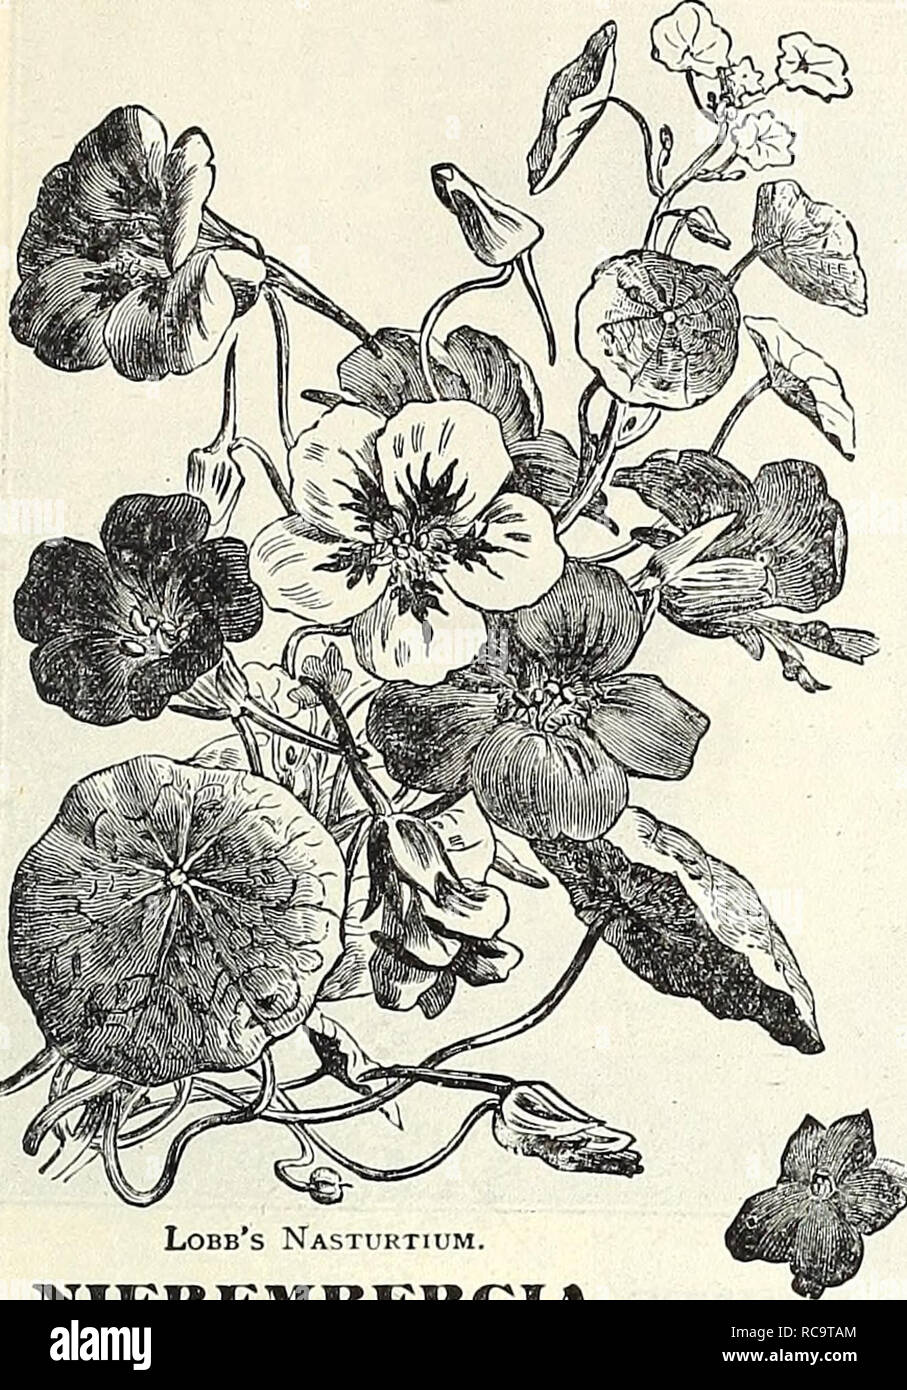 . Dreer's 1838 1908 garden book. Seeds Catalogs; Nursery stock Catalogs; Gardening Equipment and supplies Catalogs; Flowers Seeds Catalogs; Vegetables Seeds Catalogs; Fruit Seeds Catalogs. ENRTADREER-PHIIADELPHIAW W/ RELIABIEFLOWERSEEDS i los. conspicuous ihey :;e to Lobb's Nasturtium. ]VIER£]&gt;IB£RGIA. (Cup Flower). per pkt A half-hardy perennial, slender- growing plant, perpetually in bloom, flowering tlie first year if sown early , desiralile for the greenhouse, ba,^kets, vases, or bedding out ; 1 ft. 3421 Frutescens. White, tinted with lilac 10 NIGELLA. the (Love in a Mist, or Devil liii Stock Photo